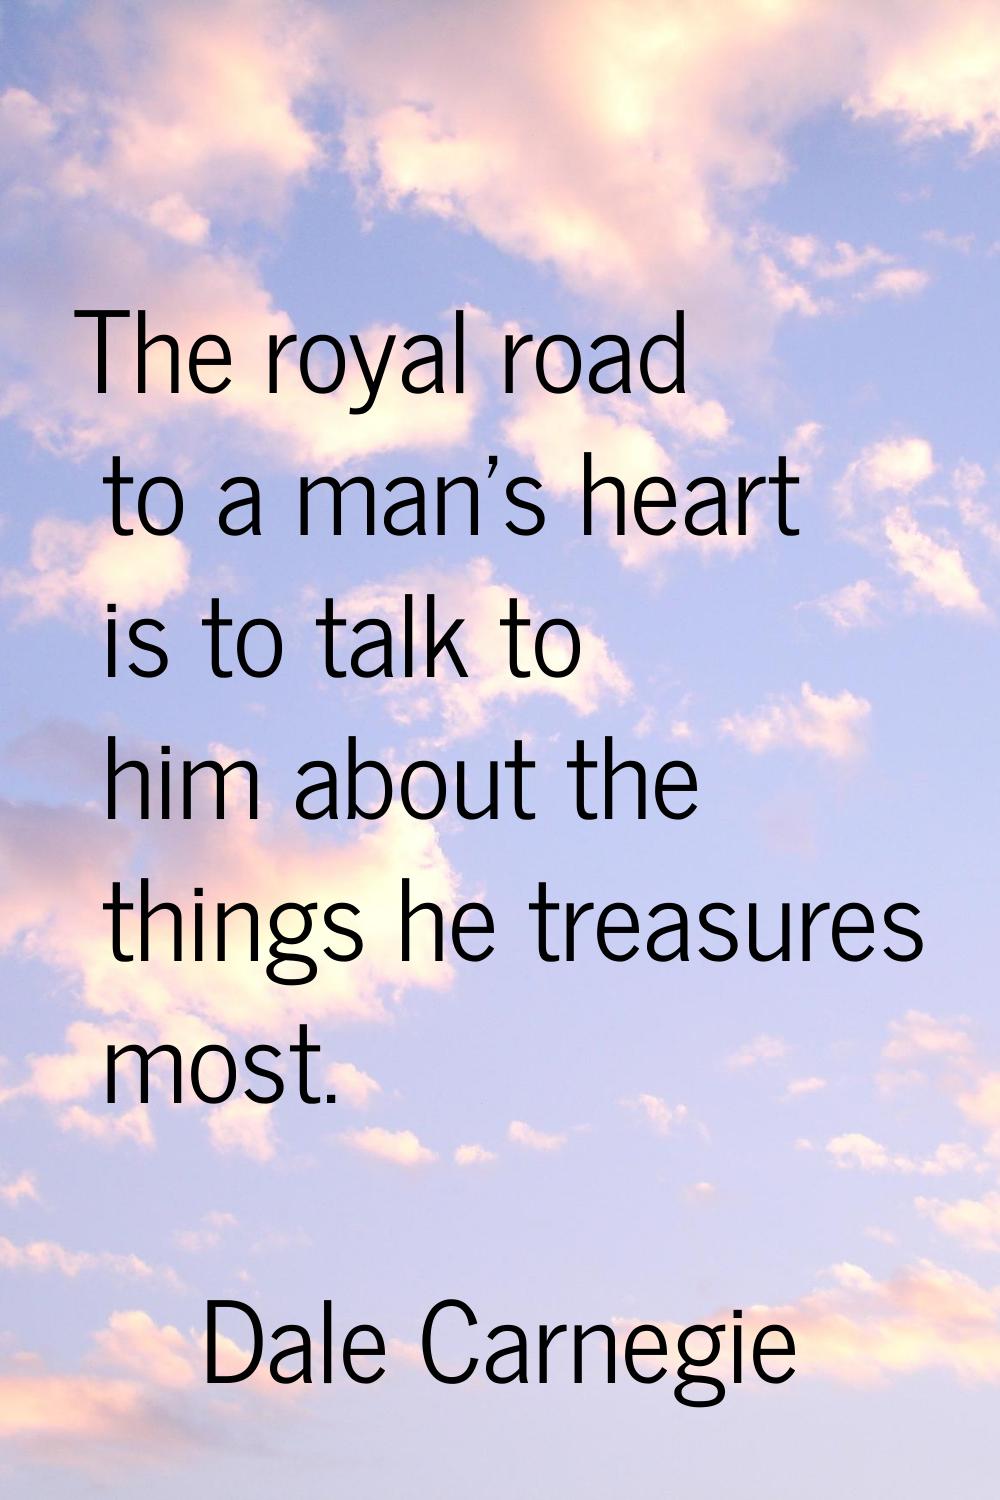 The royal road to a man's heart is to talk to him about the things he treasures most.